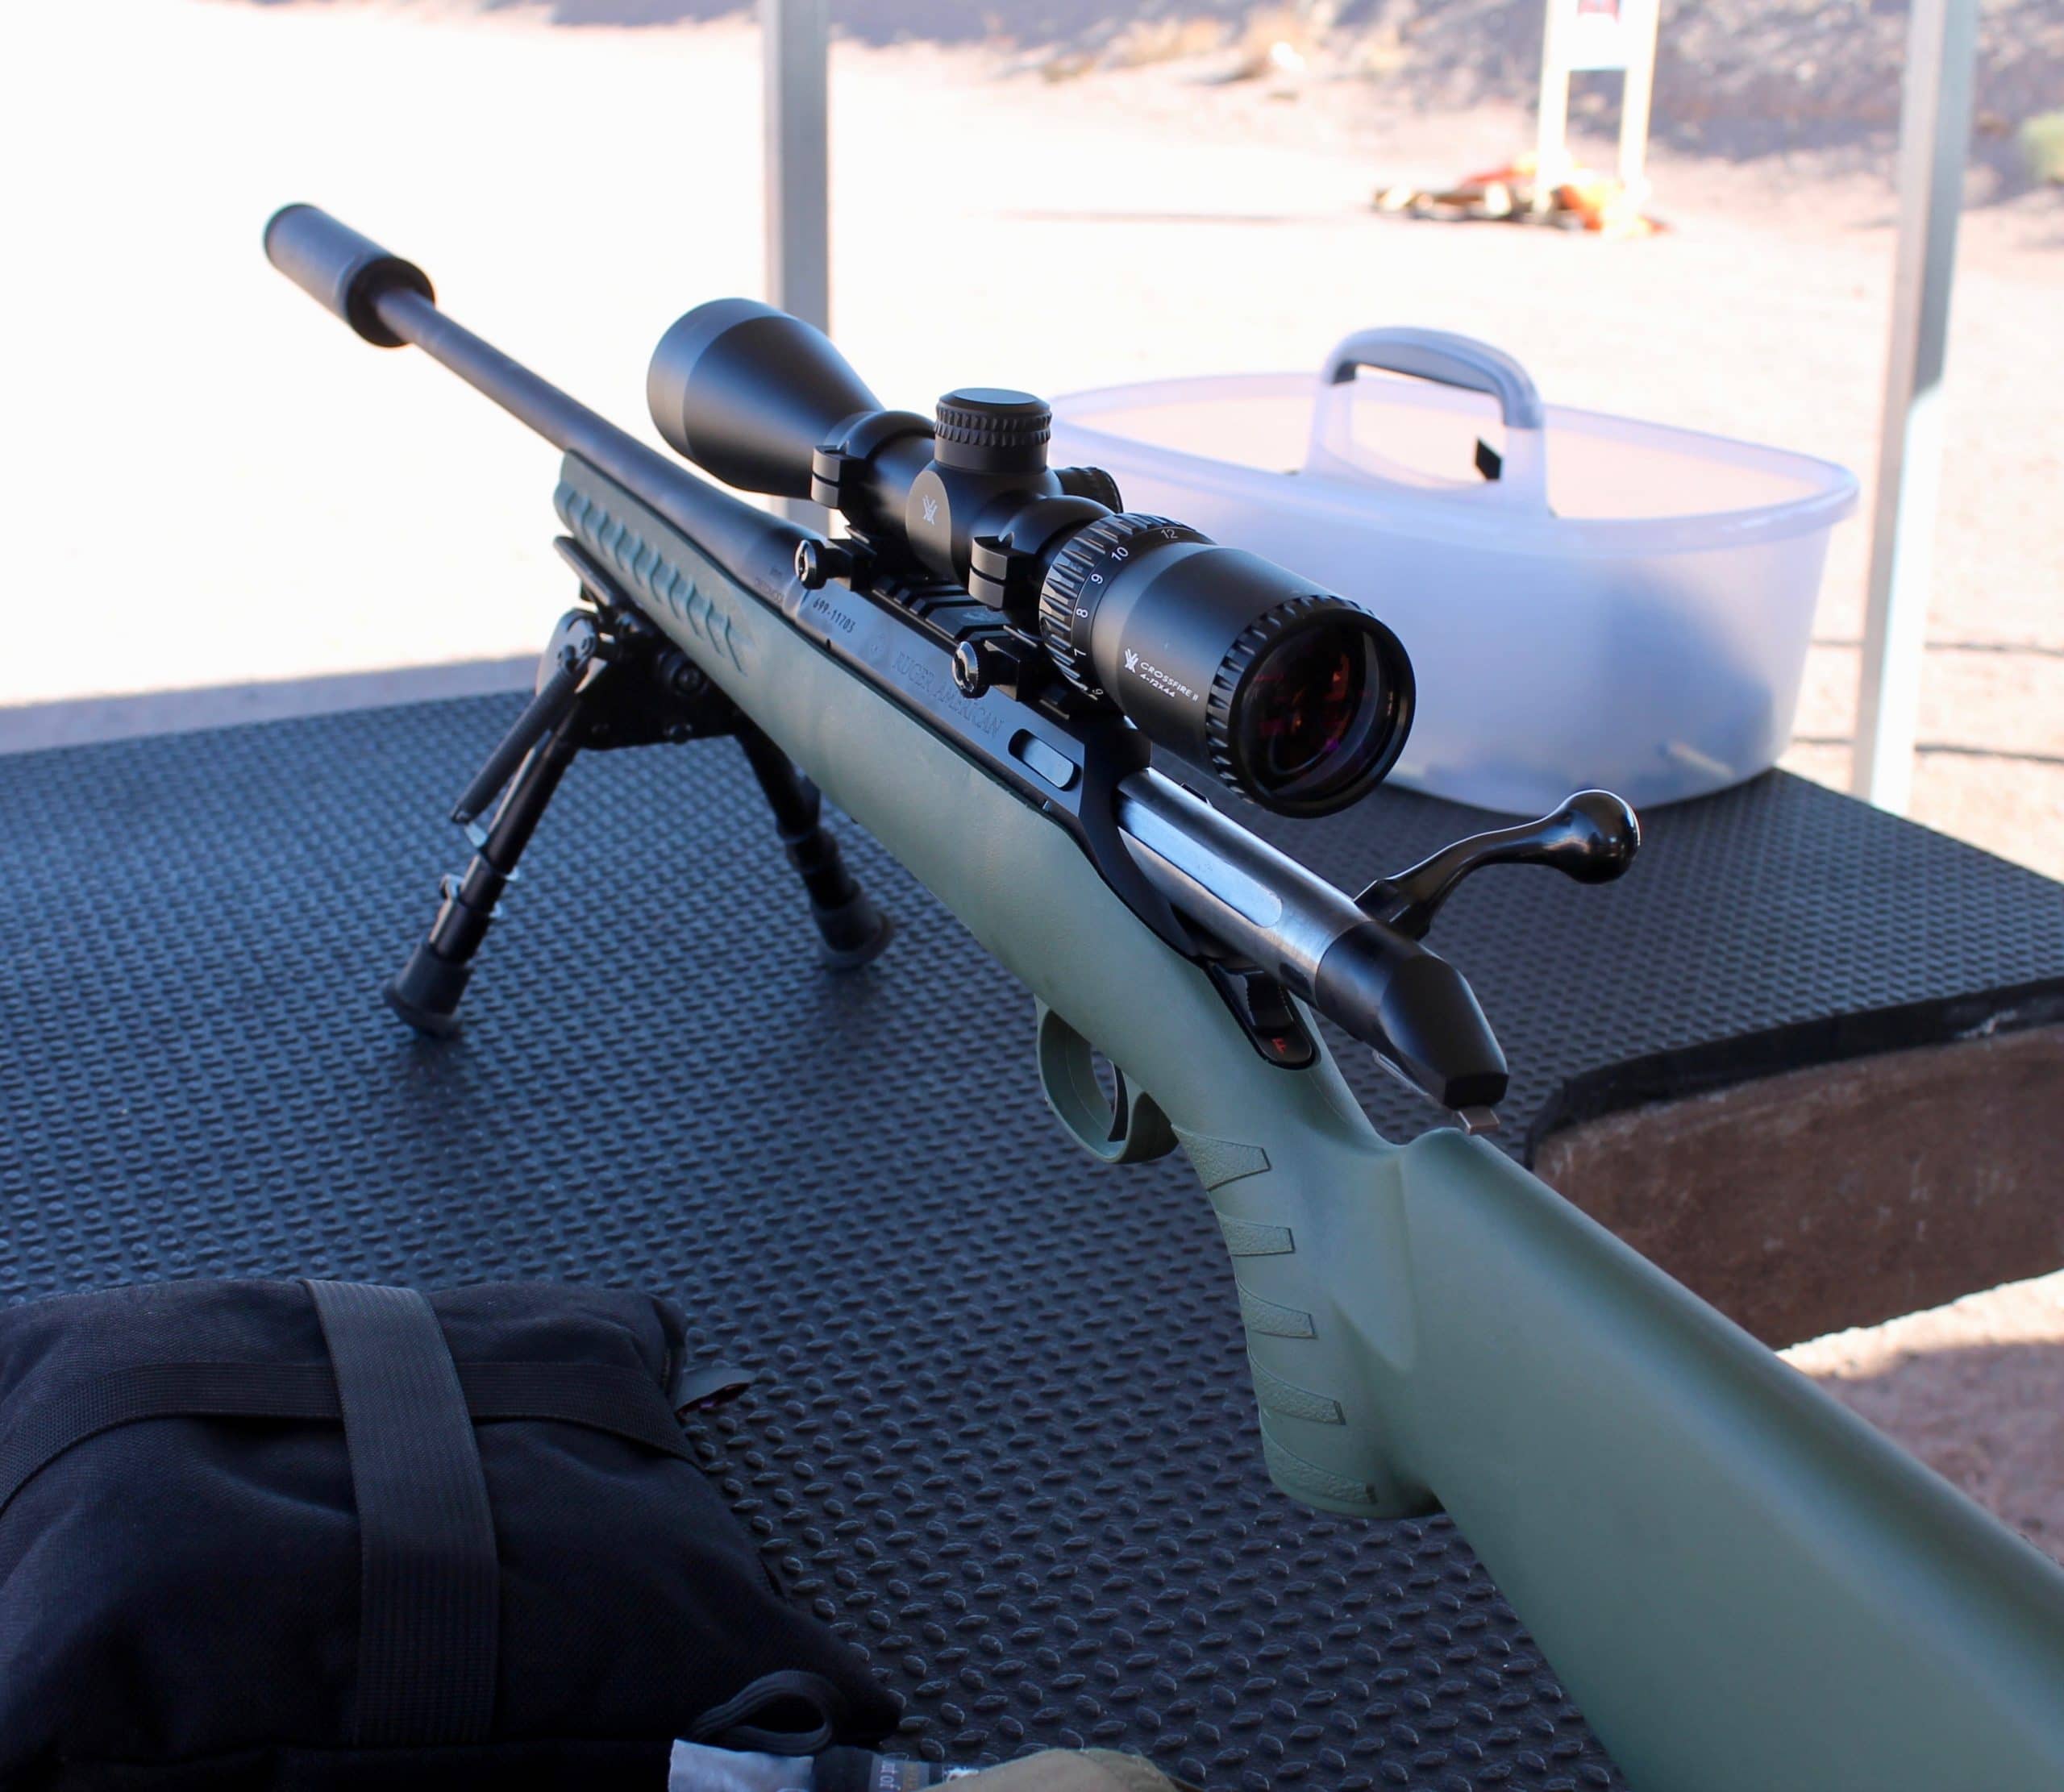 Ruger American Predator – How Does It Compare To Other Ruger American Rifles?